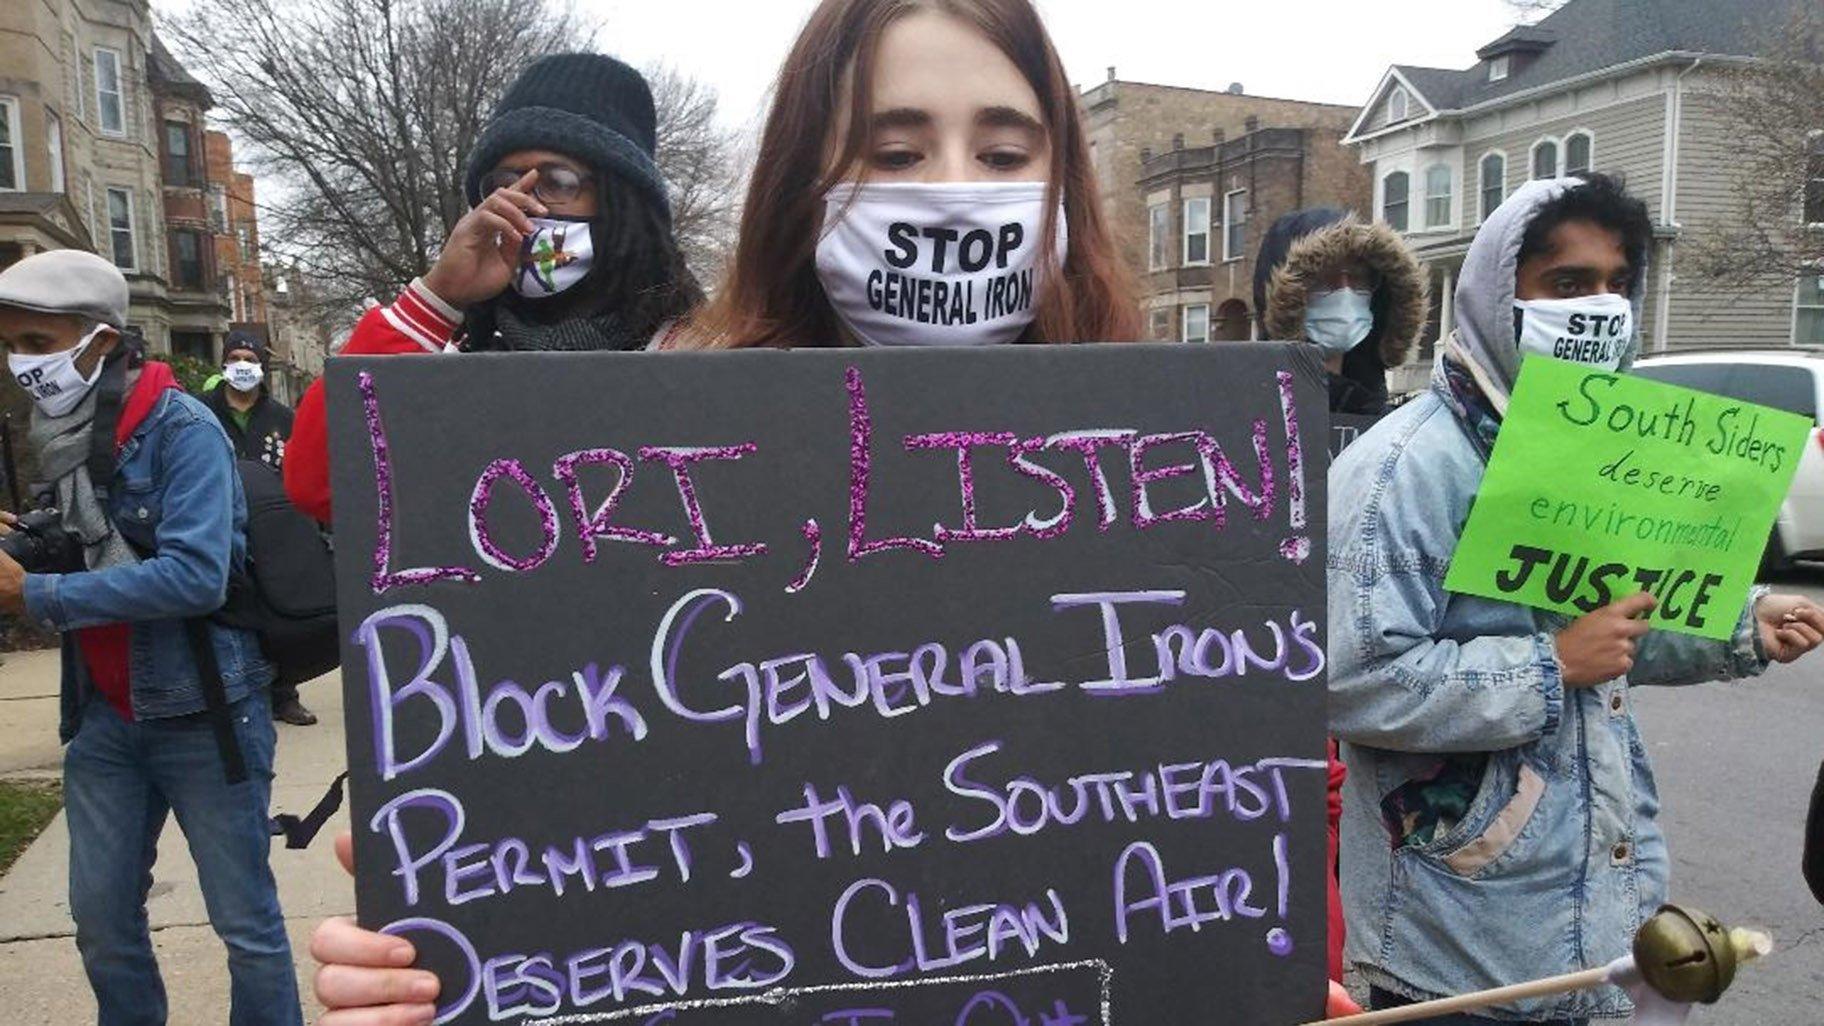 Protests against General Iron's relocation to the Southeast Side included a march on the mayor's house in November 2020. (Annemarie Mannion / WTTW News)